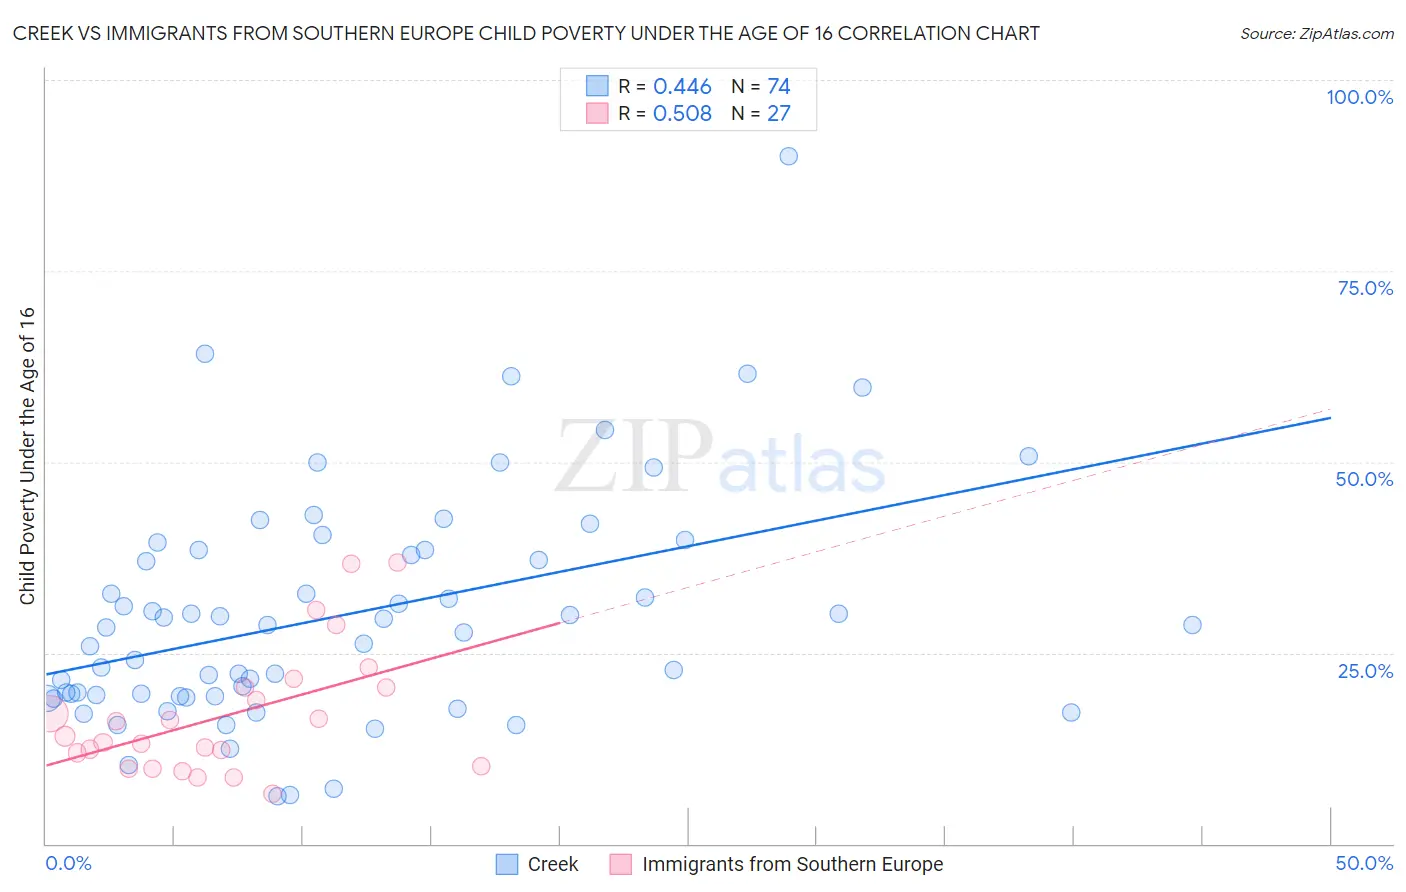 Creek vs Immigrants from Southern Europe Child Poverty Under the Age of 16